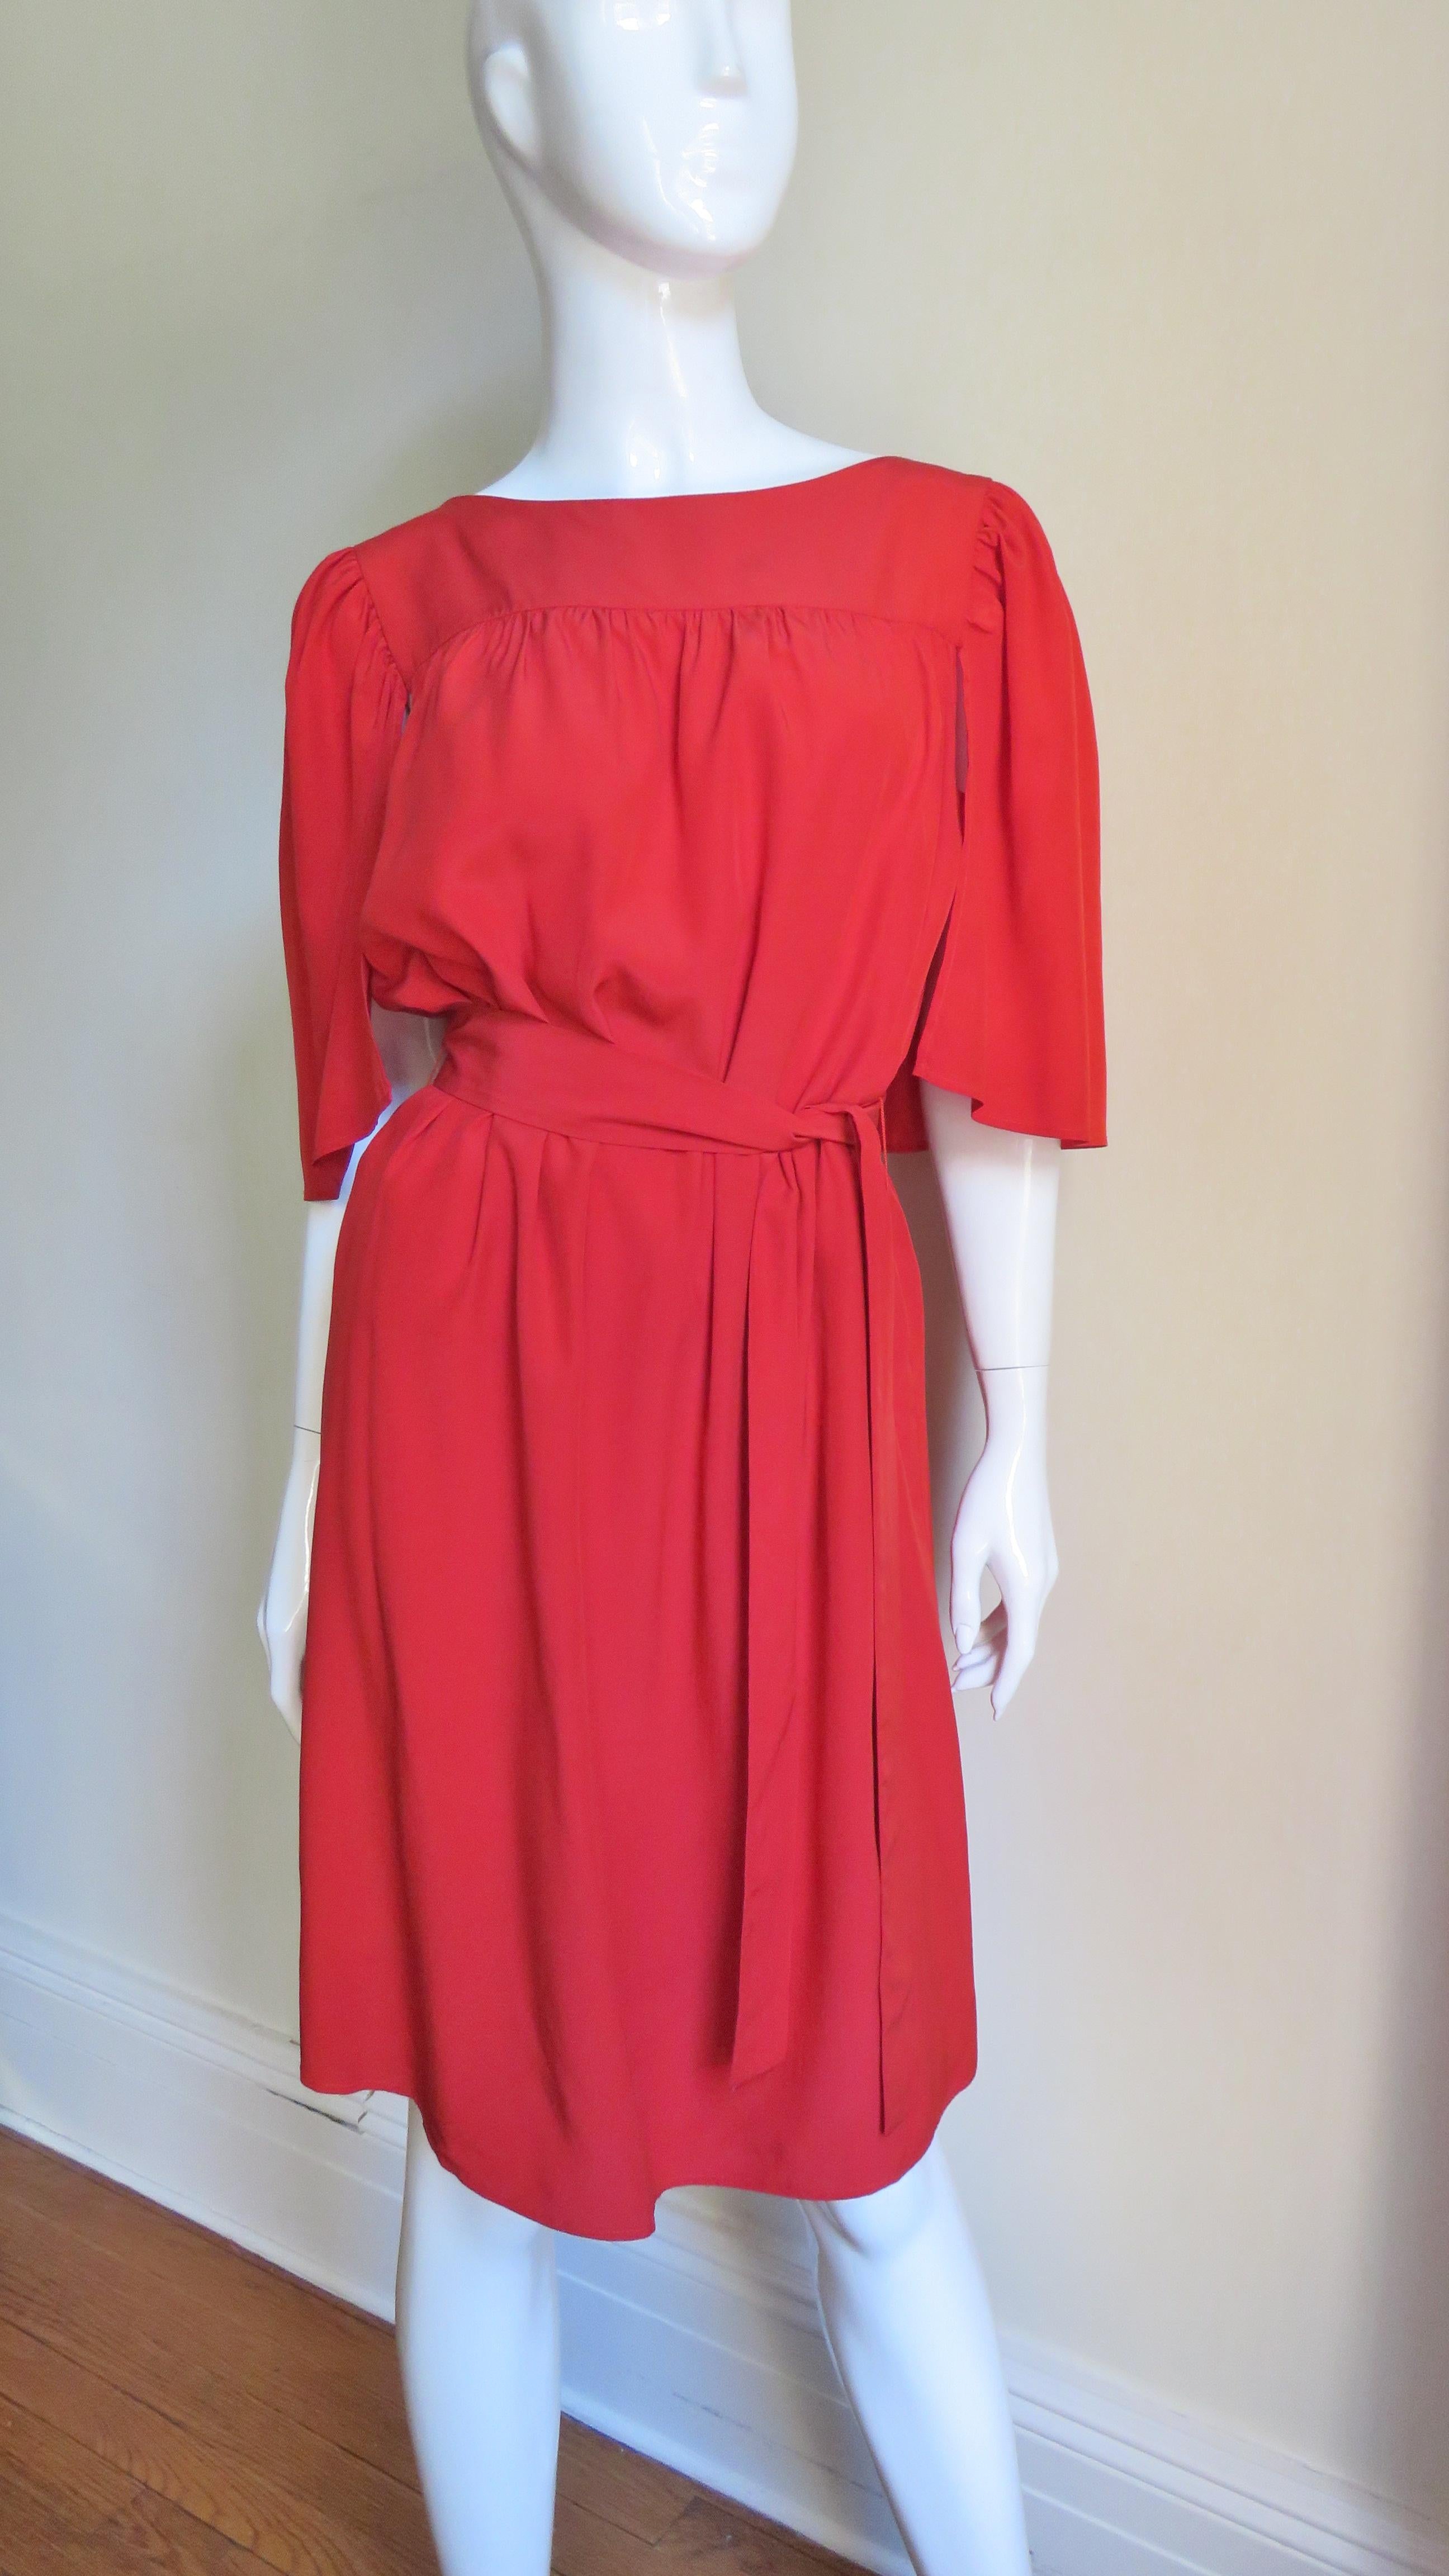 Yves Saint Laurent Silk Caplet Dress In Good Condition For Sale In Water Mill, NY